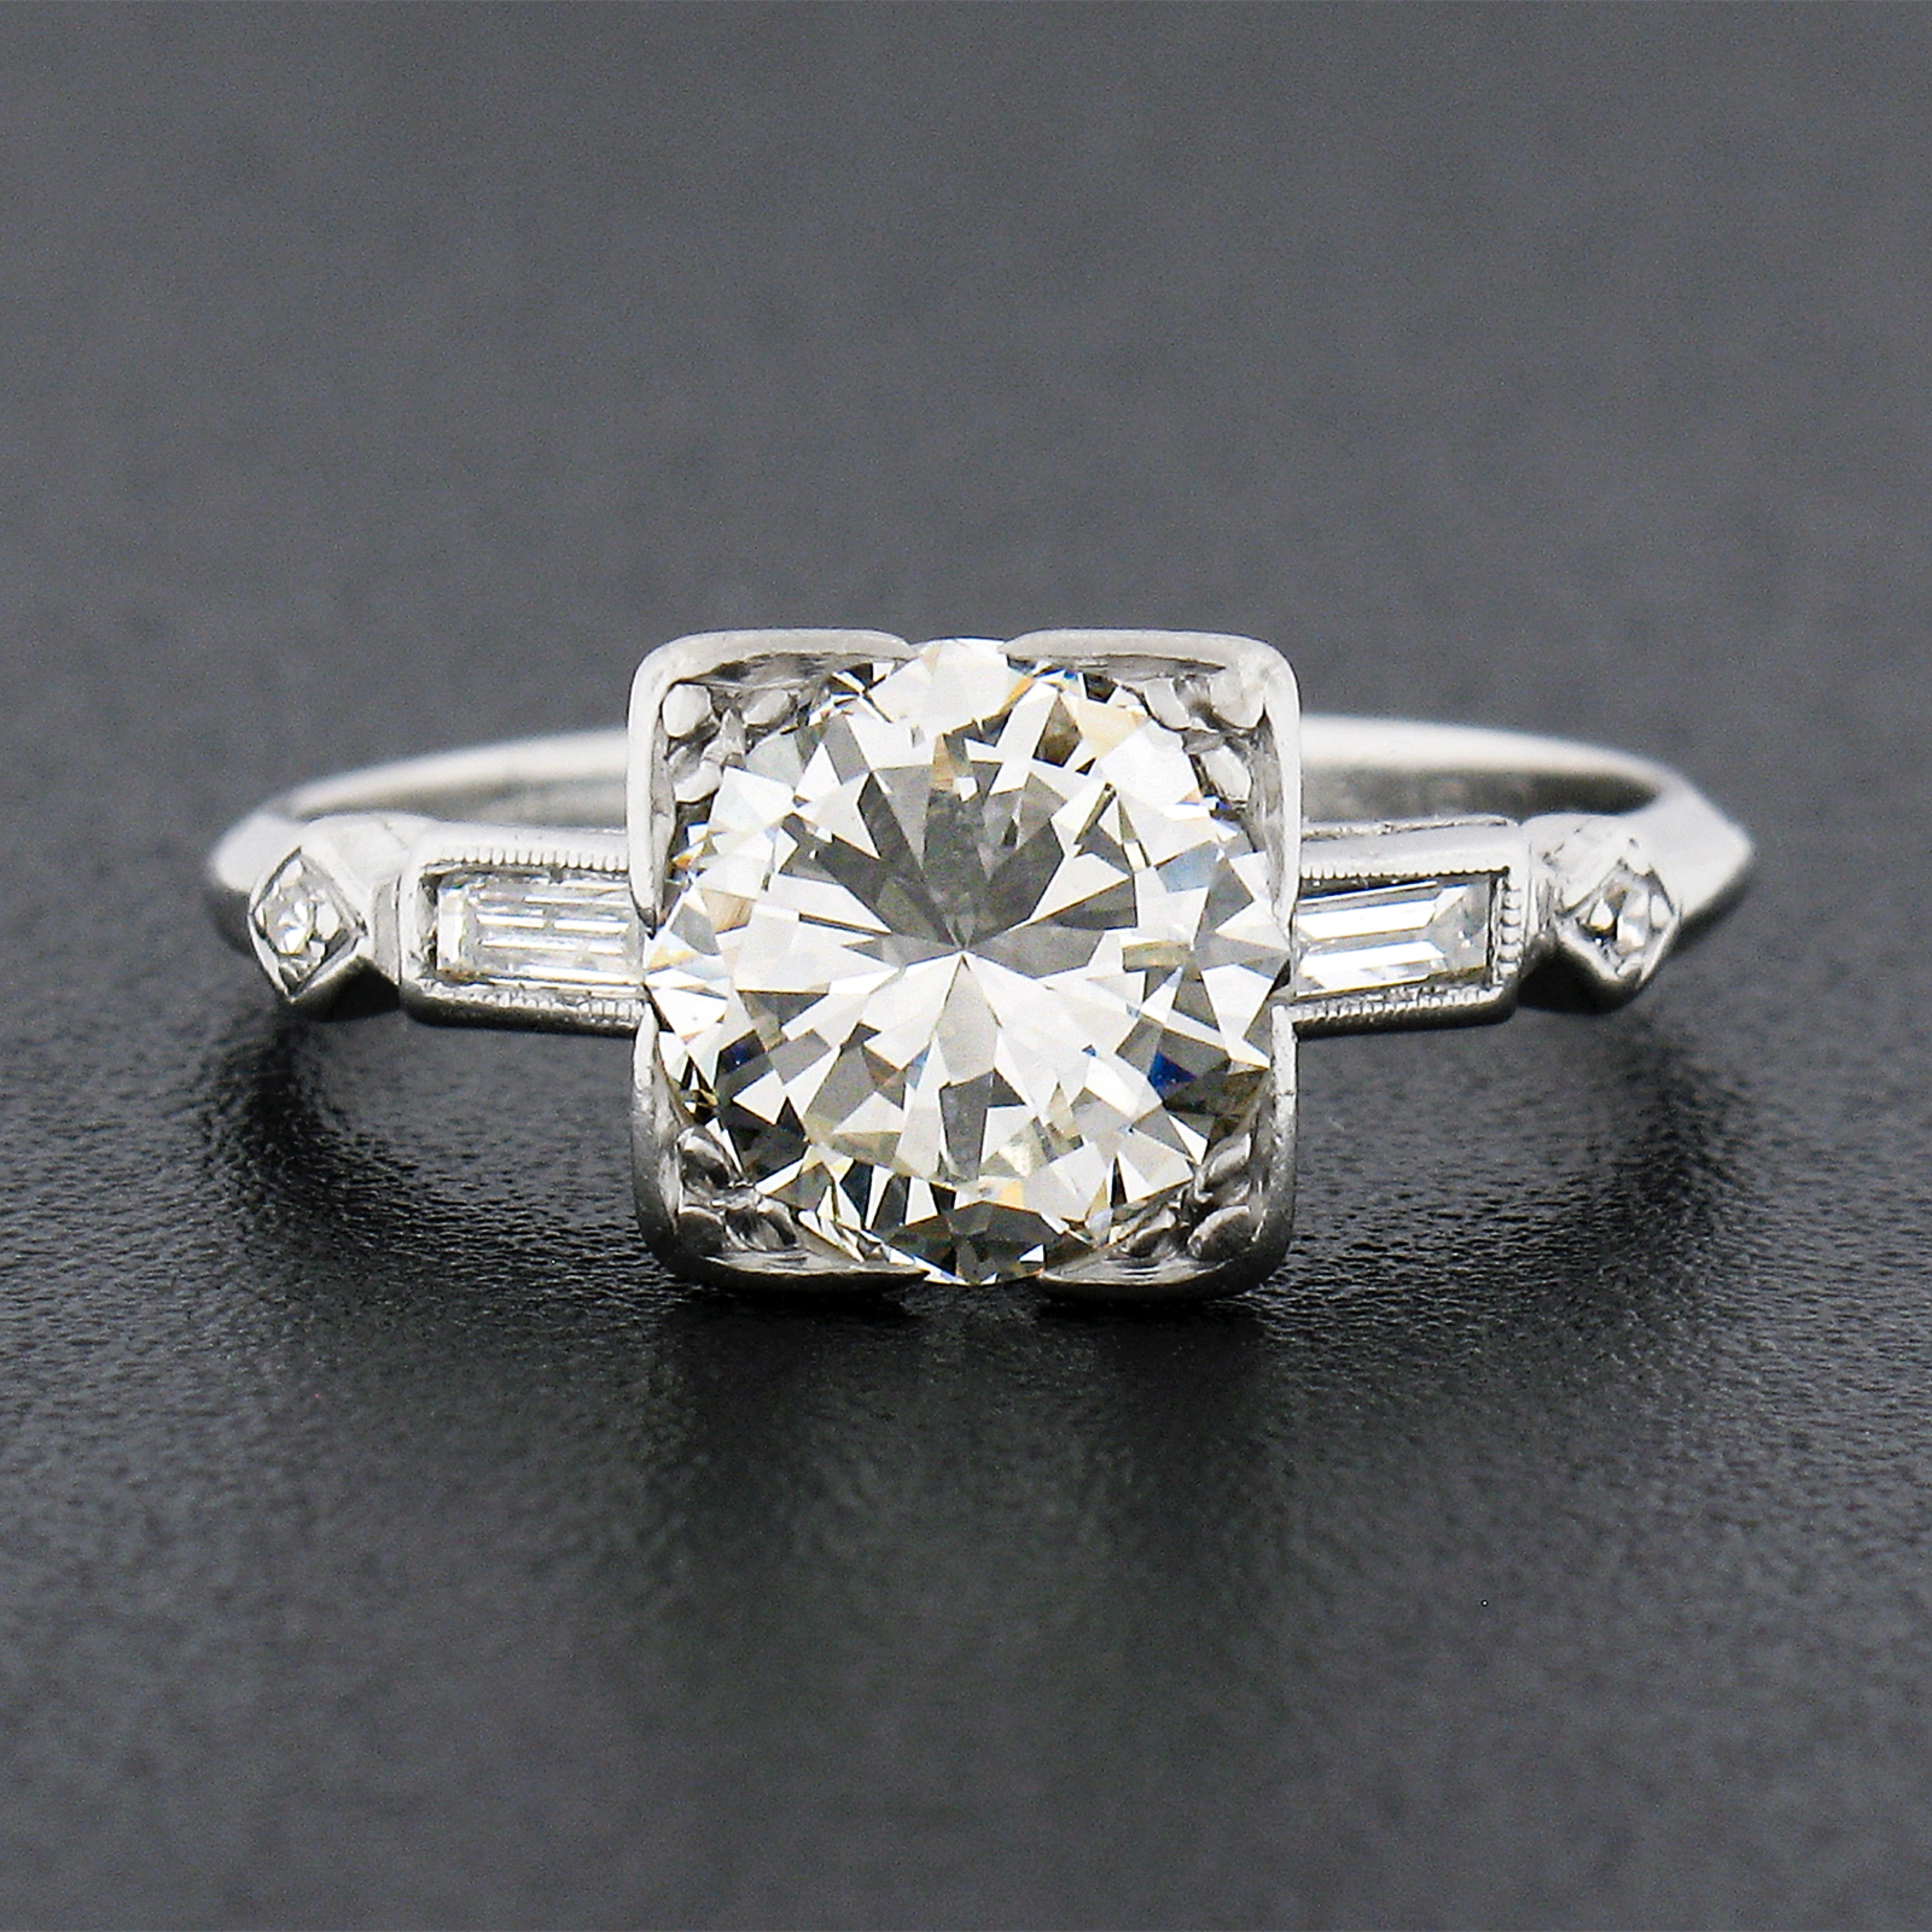 This gorgeous vintage diamond engagement ring was crafted from solid platinum during the 1940's. It features a stunning and super fiery old transitional cut diamond neatly pave set at the center of the squared open basket setting, displaying a very